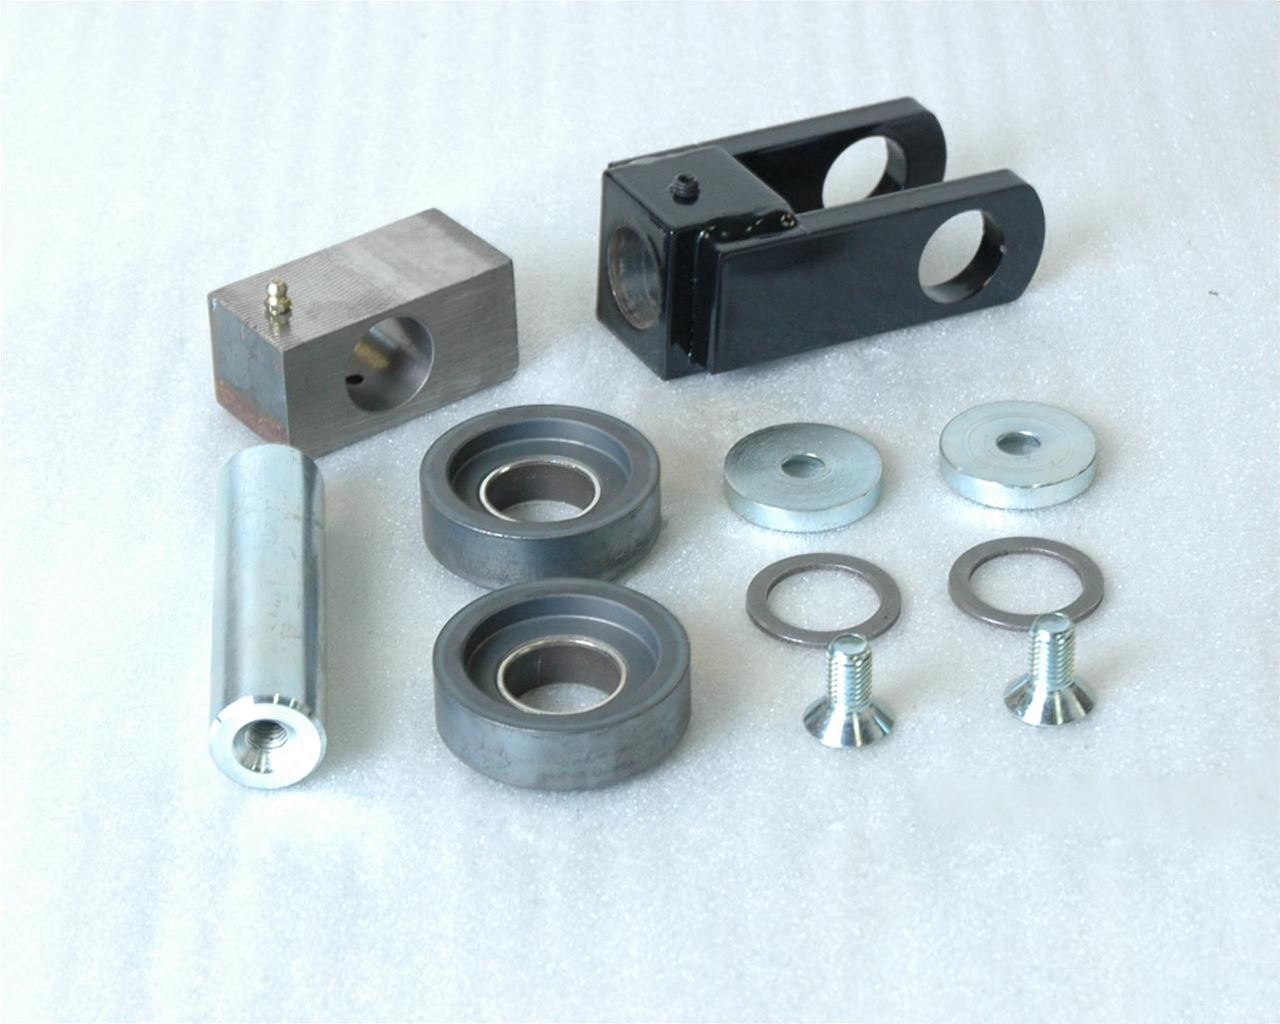 Lift table spare part - Wedged wheel kit TUB/TCB 1000/600H